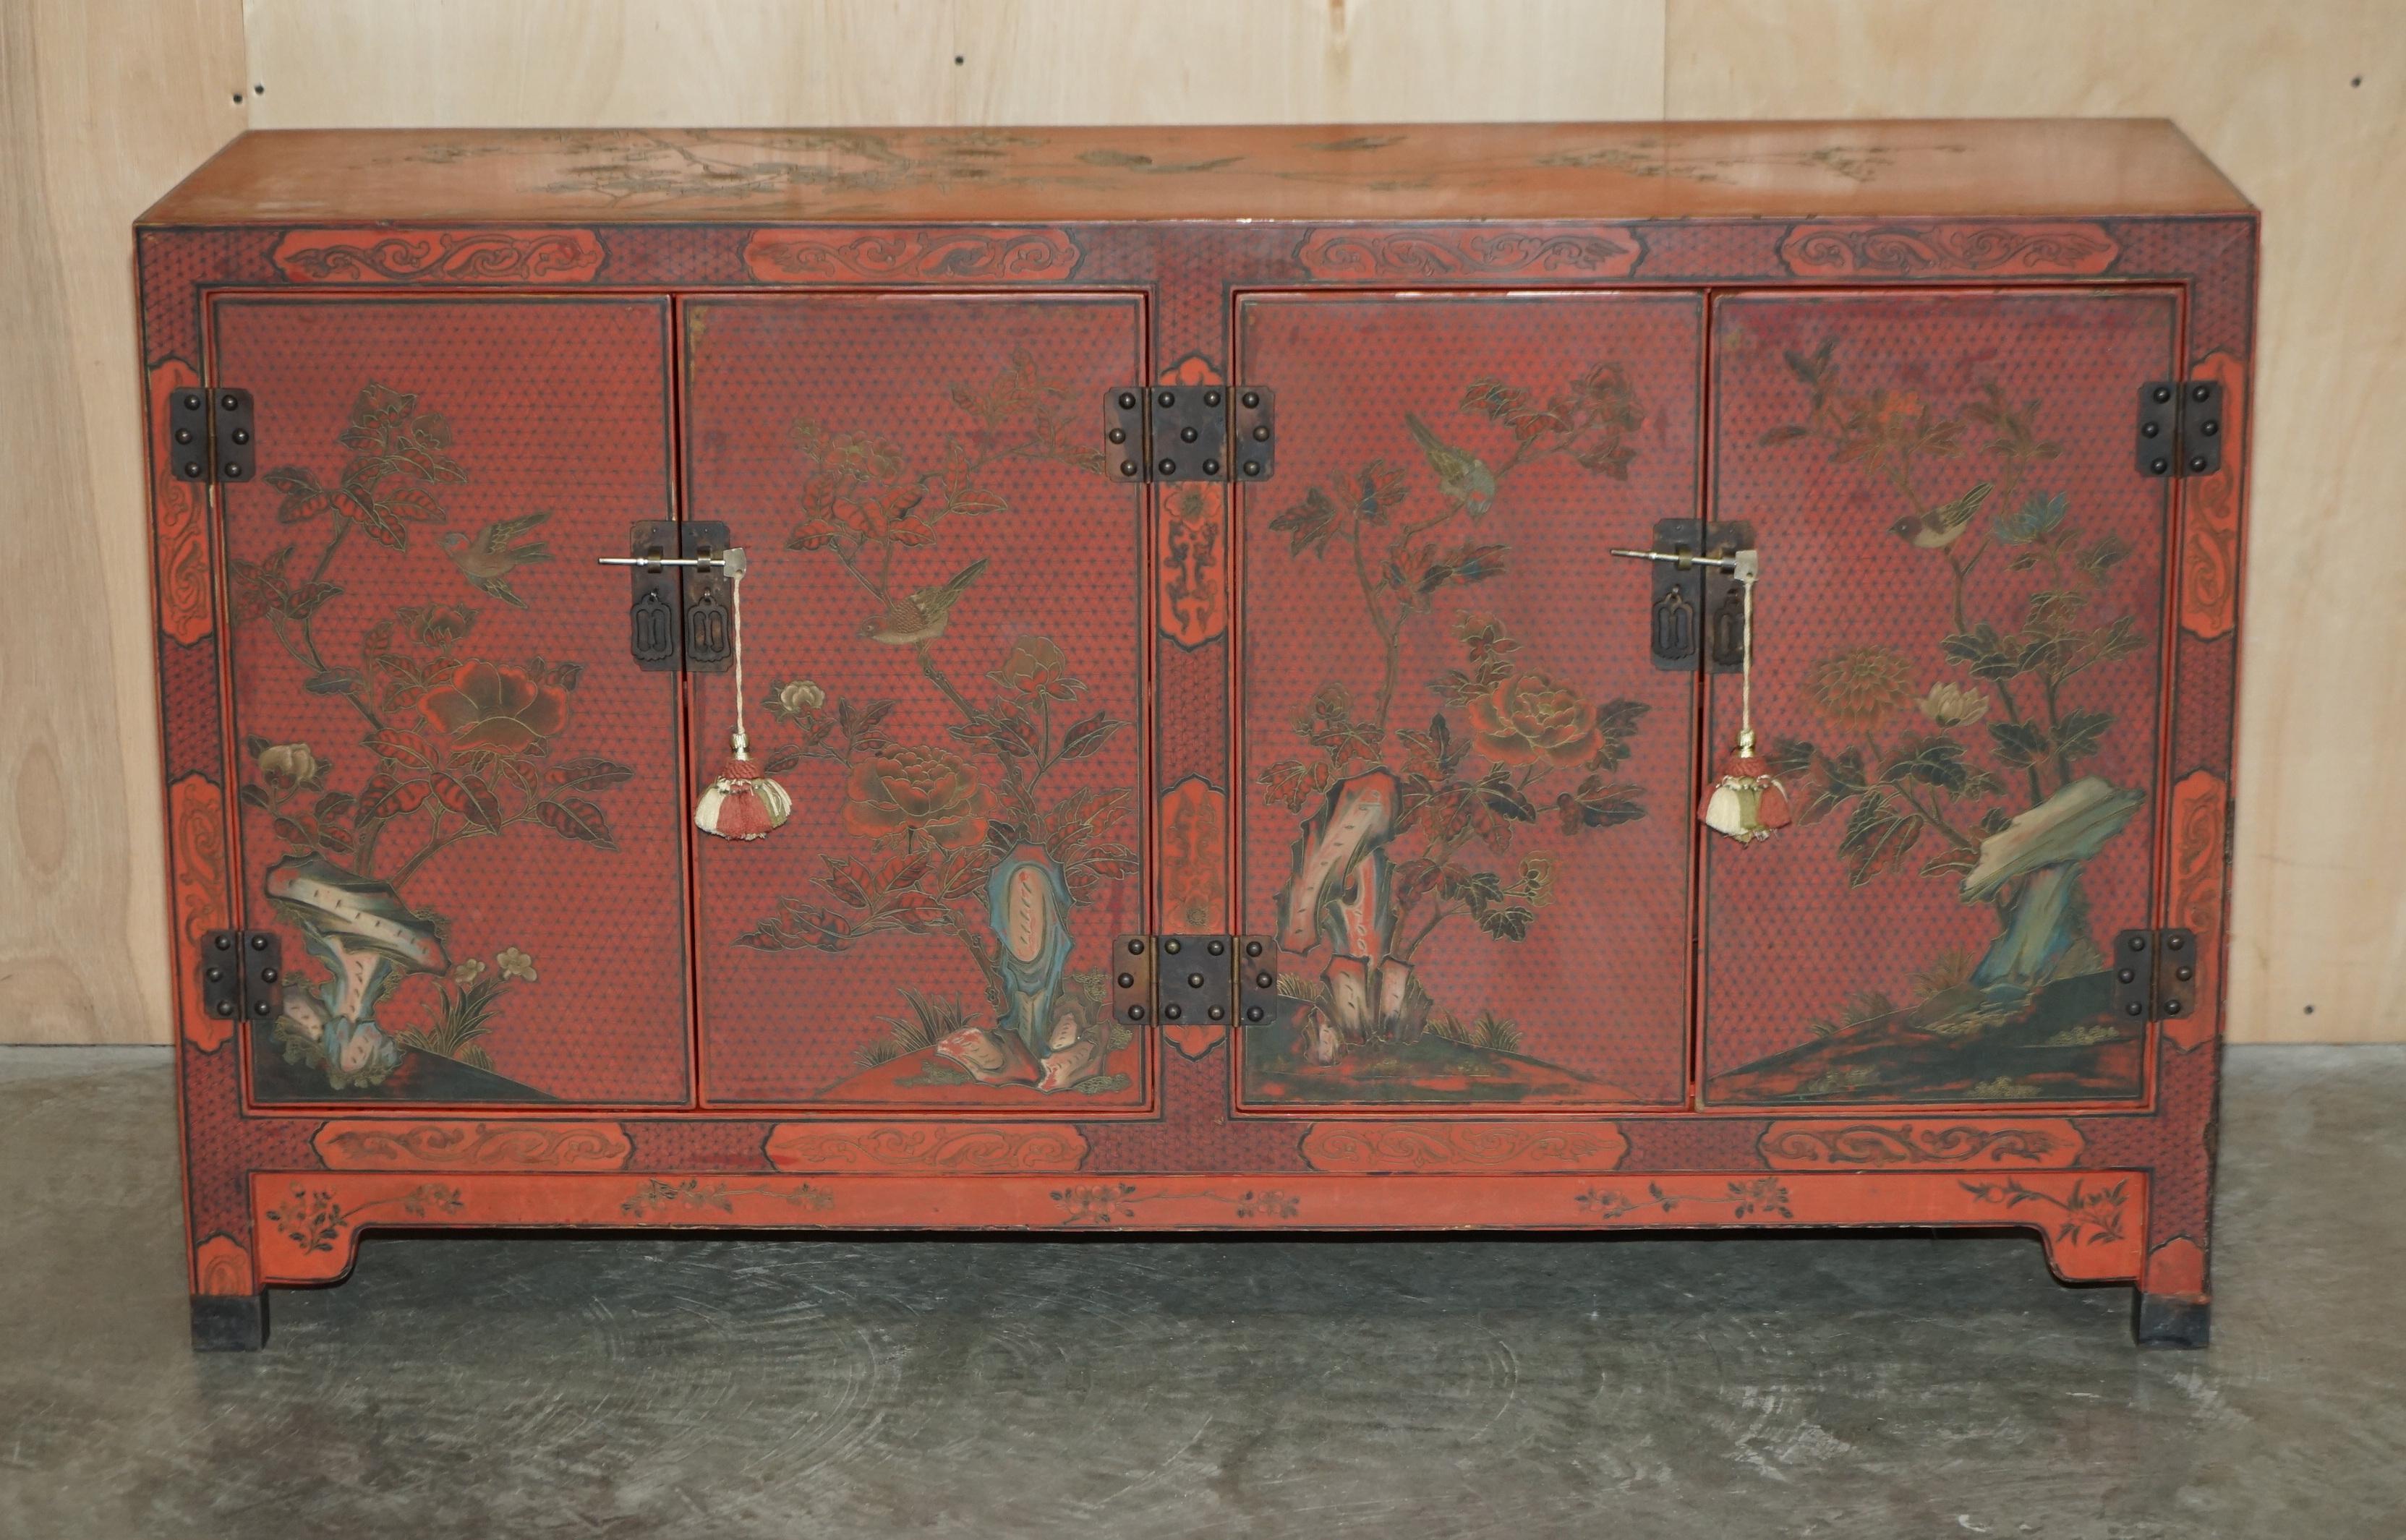 We are delighted to offer for sale this very nicely made, Chinese Chinoiserie floral painted and lacquered sideboard cupboard

This is a very good-looking and decorative piece, it offers a great deal of cupboard storage and sits well in any